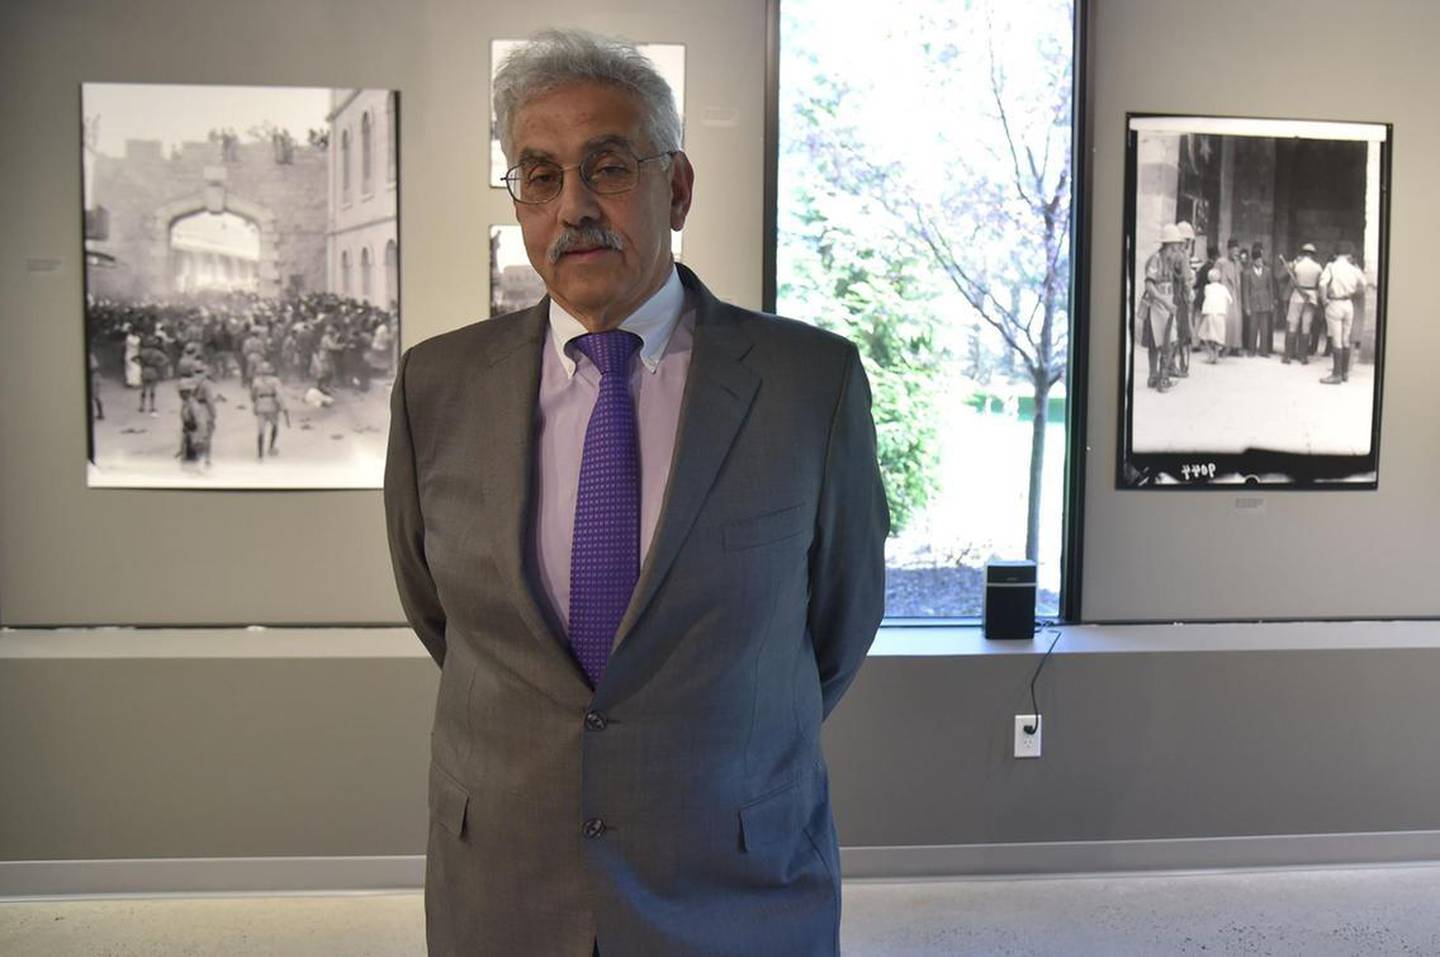 Earlier this year, Faisal Saleh opened the first Palestinian art museum in the United States. AFP